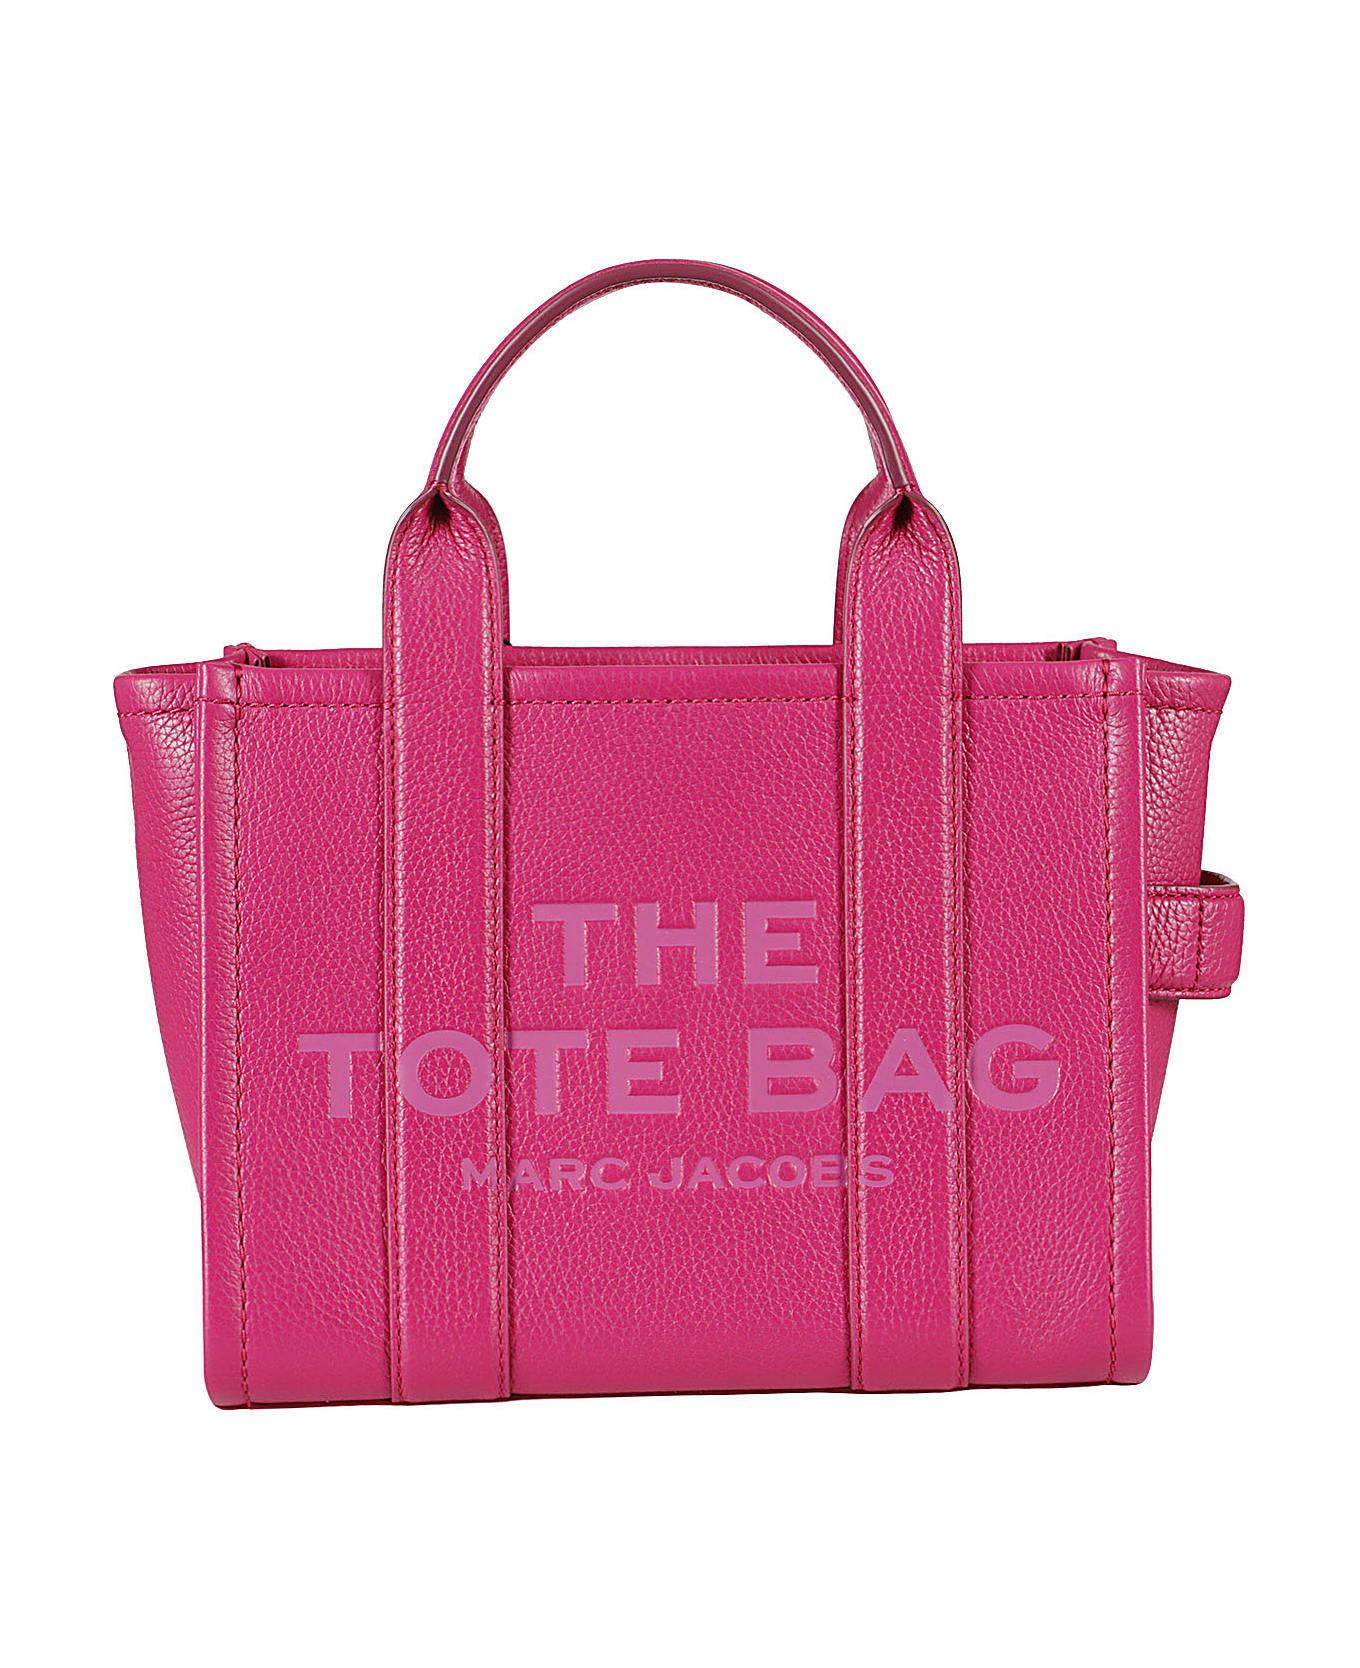 Marc Jacobs The Small Tote - Lipstick Pink トートバッグ